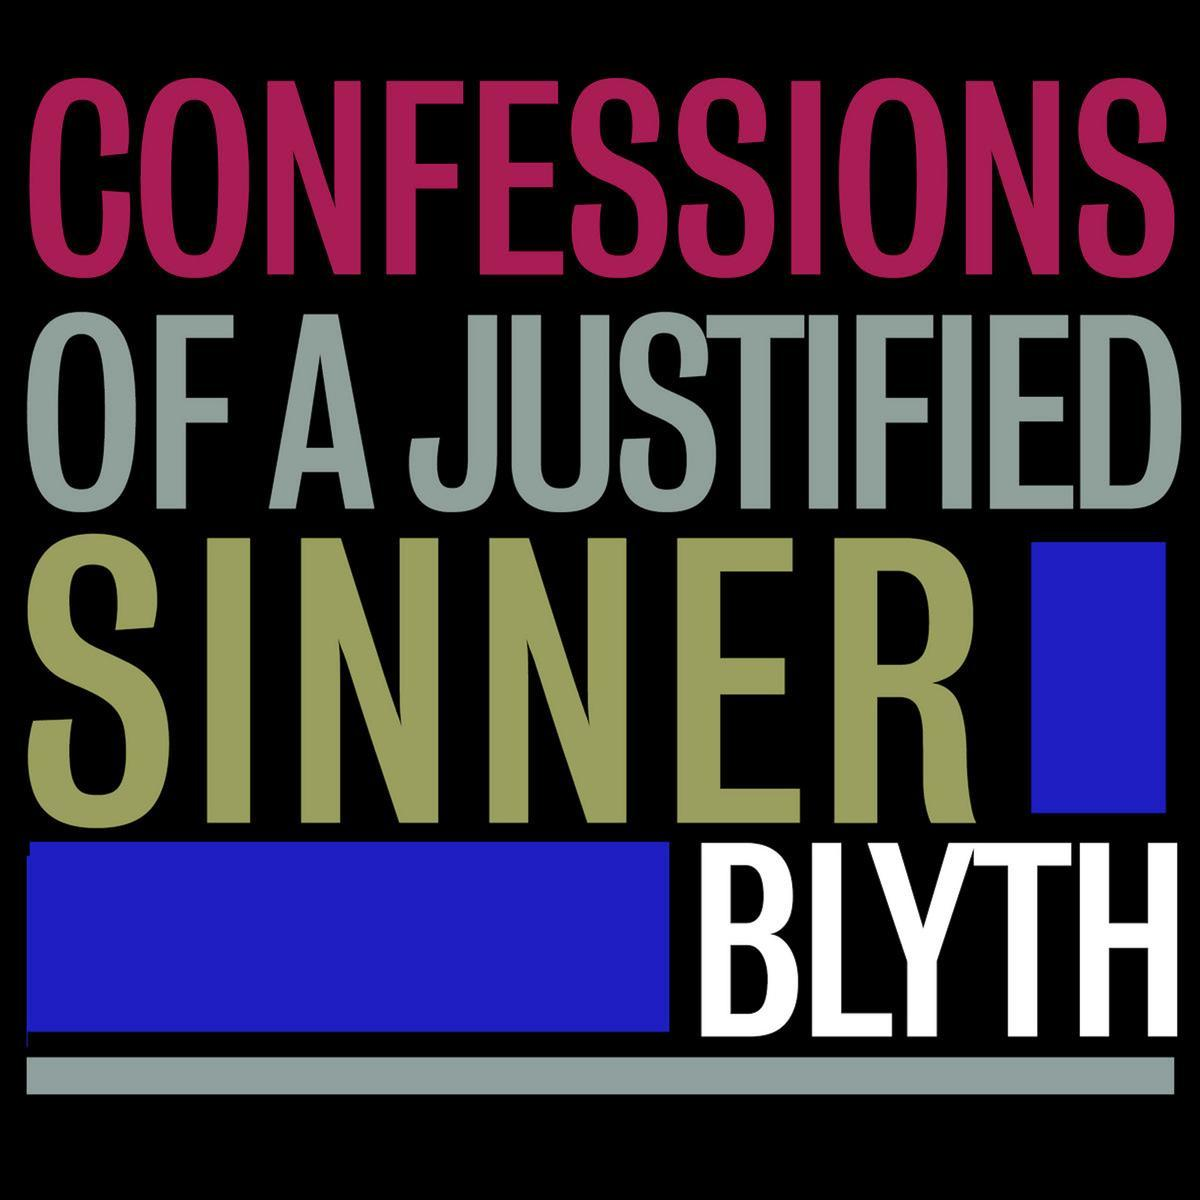 Blyth Sinner (Vinyl) Justified of a - - Confessions